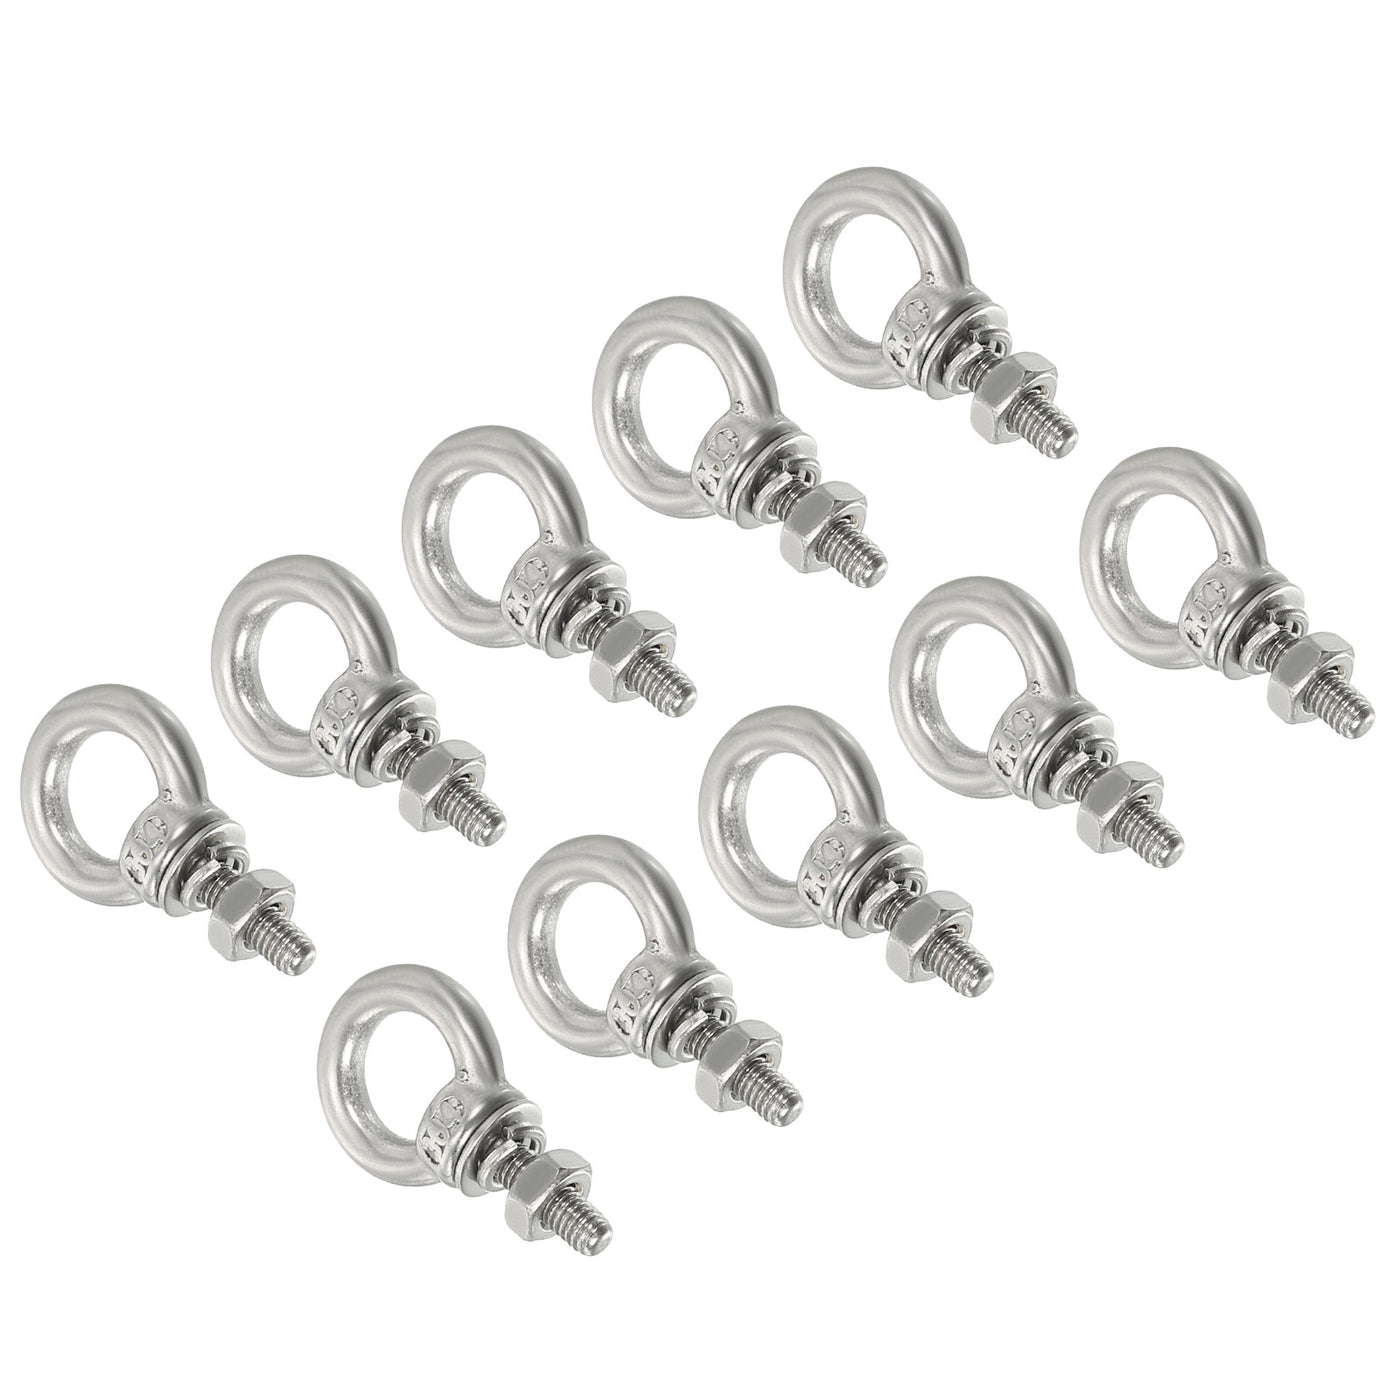 uxcell Uxcell M3x90 1/8"x3-1/2" Stainless Steel Eye Bolts Threaded Screw Eyebolt Shoulder Ring with Nuts Washers for Lifting Hanging, 10 Set